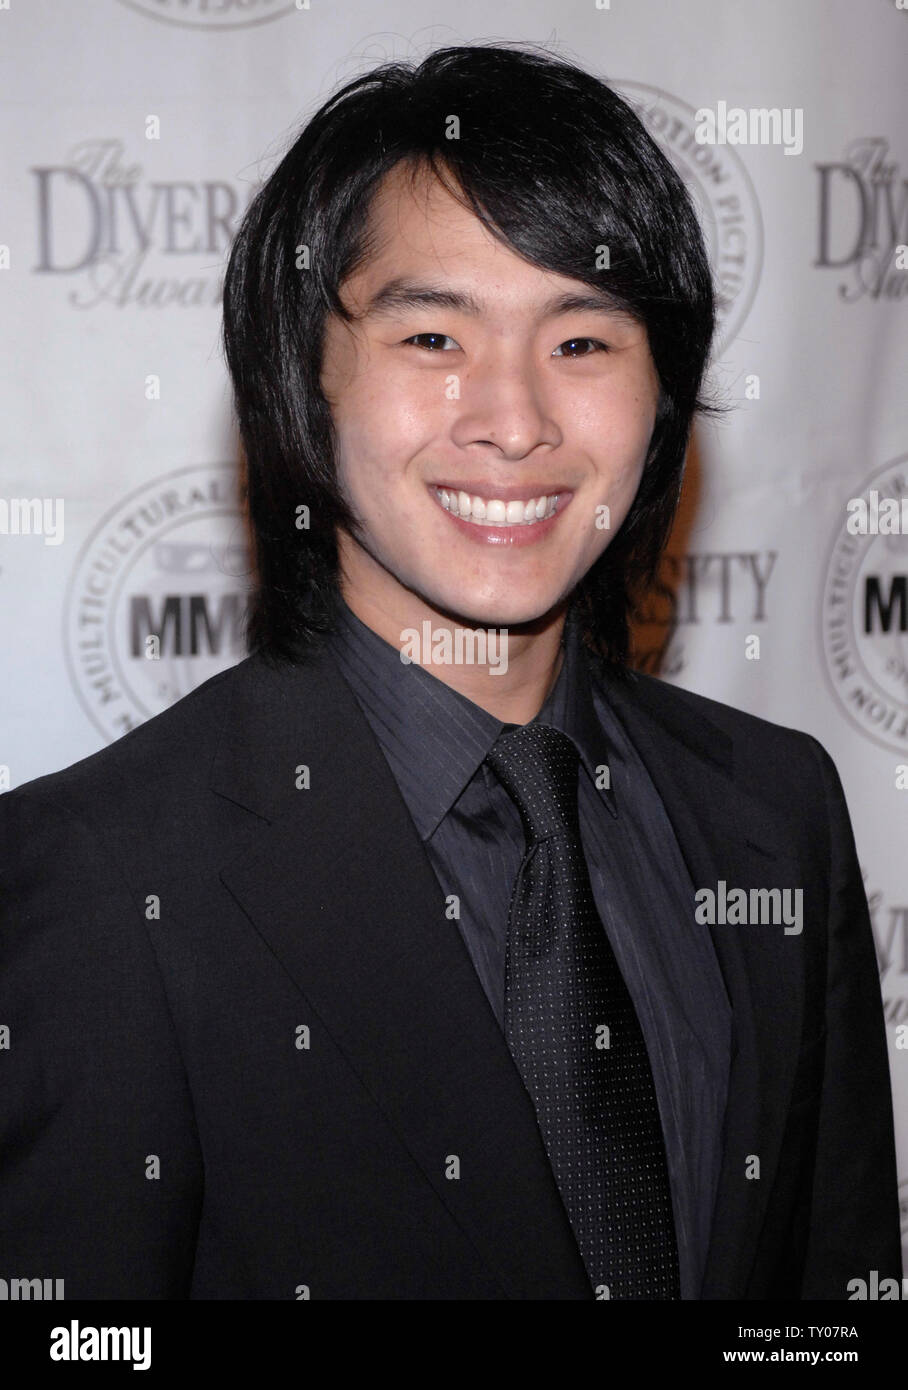 Actor Justin Chon attends the Diversity Awards held in Los Angeles on November 18, 2007. (UPI Photo/ Phil McCarten) Stock Photo